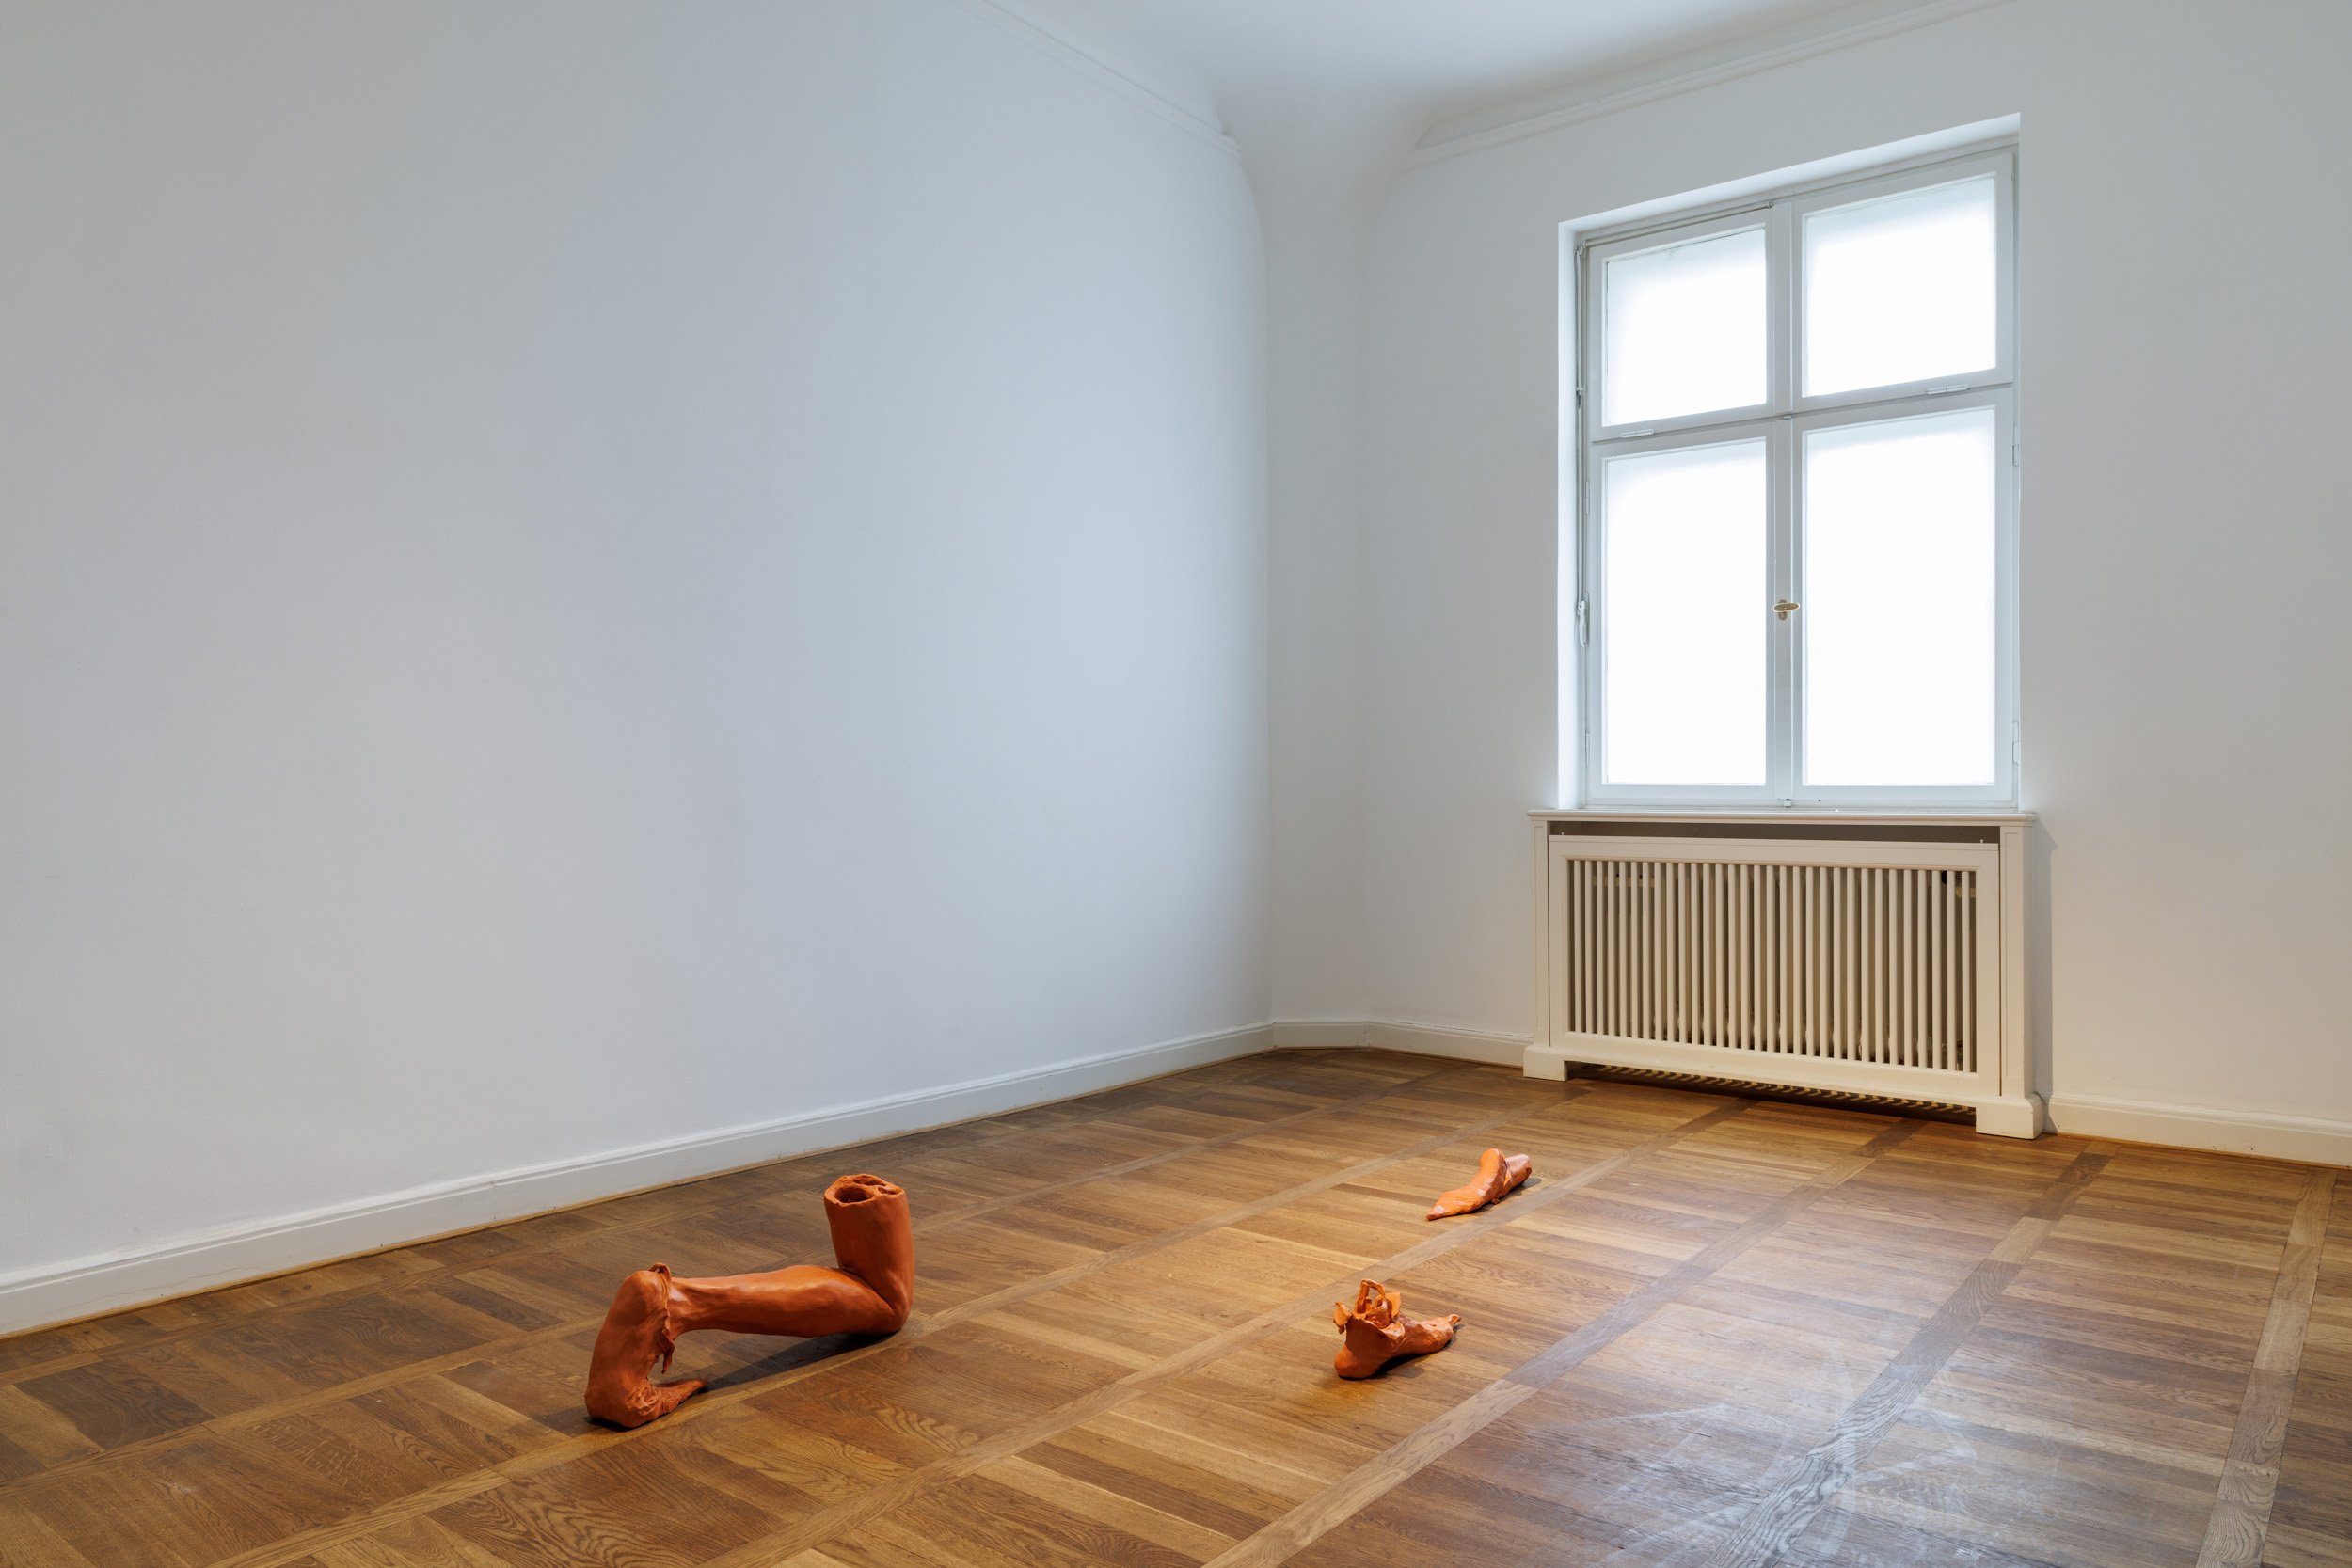  Beth Collar,  Daddy Issues, 2019.  Courtesy the artist, Gallery Khoshbakht. Installation view of  Bruno Pélassy and the Order of the Starfish,  Haus am Waldsee 2023. Photo: Frank Sperling 